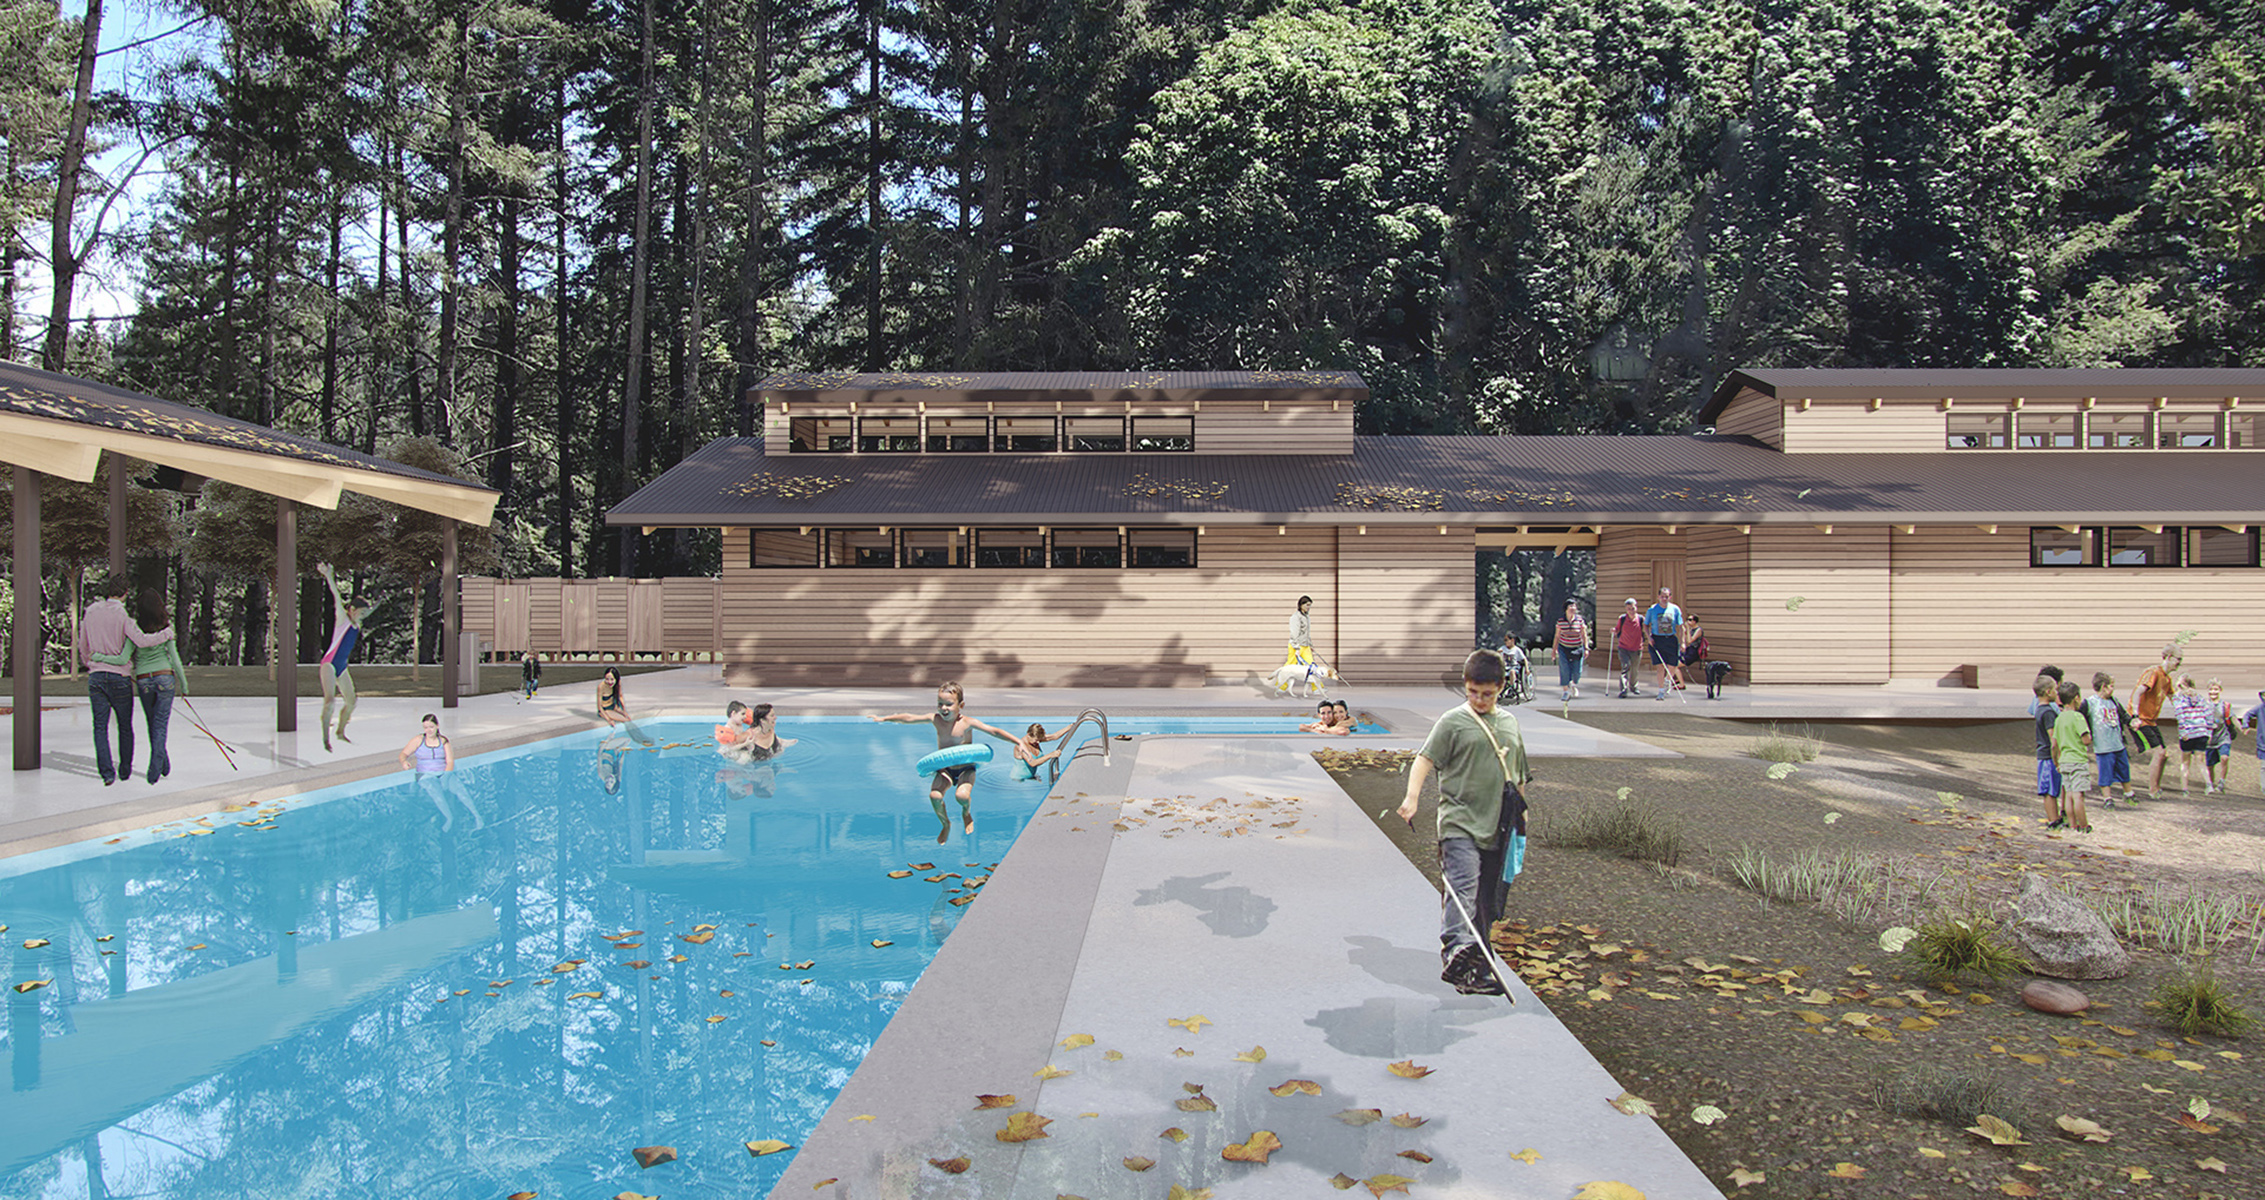 Rendering of the bathhouse. Children play in the pool. Visitors mingle around the bathhouse and adjacent lawn.